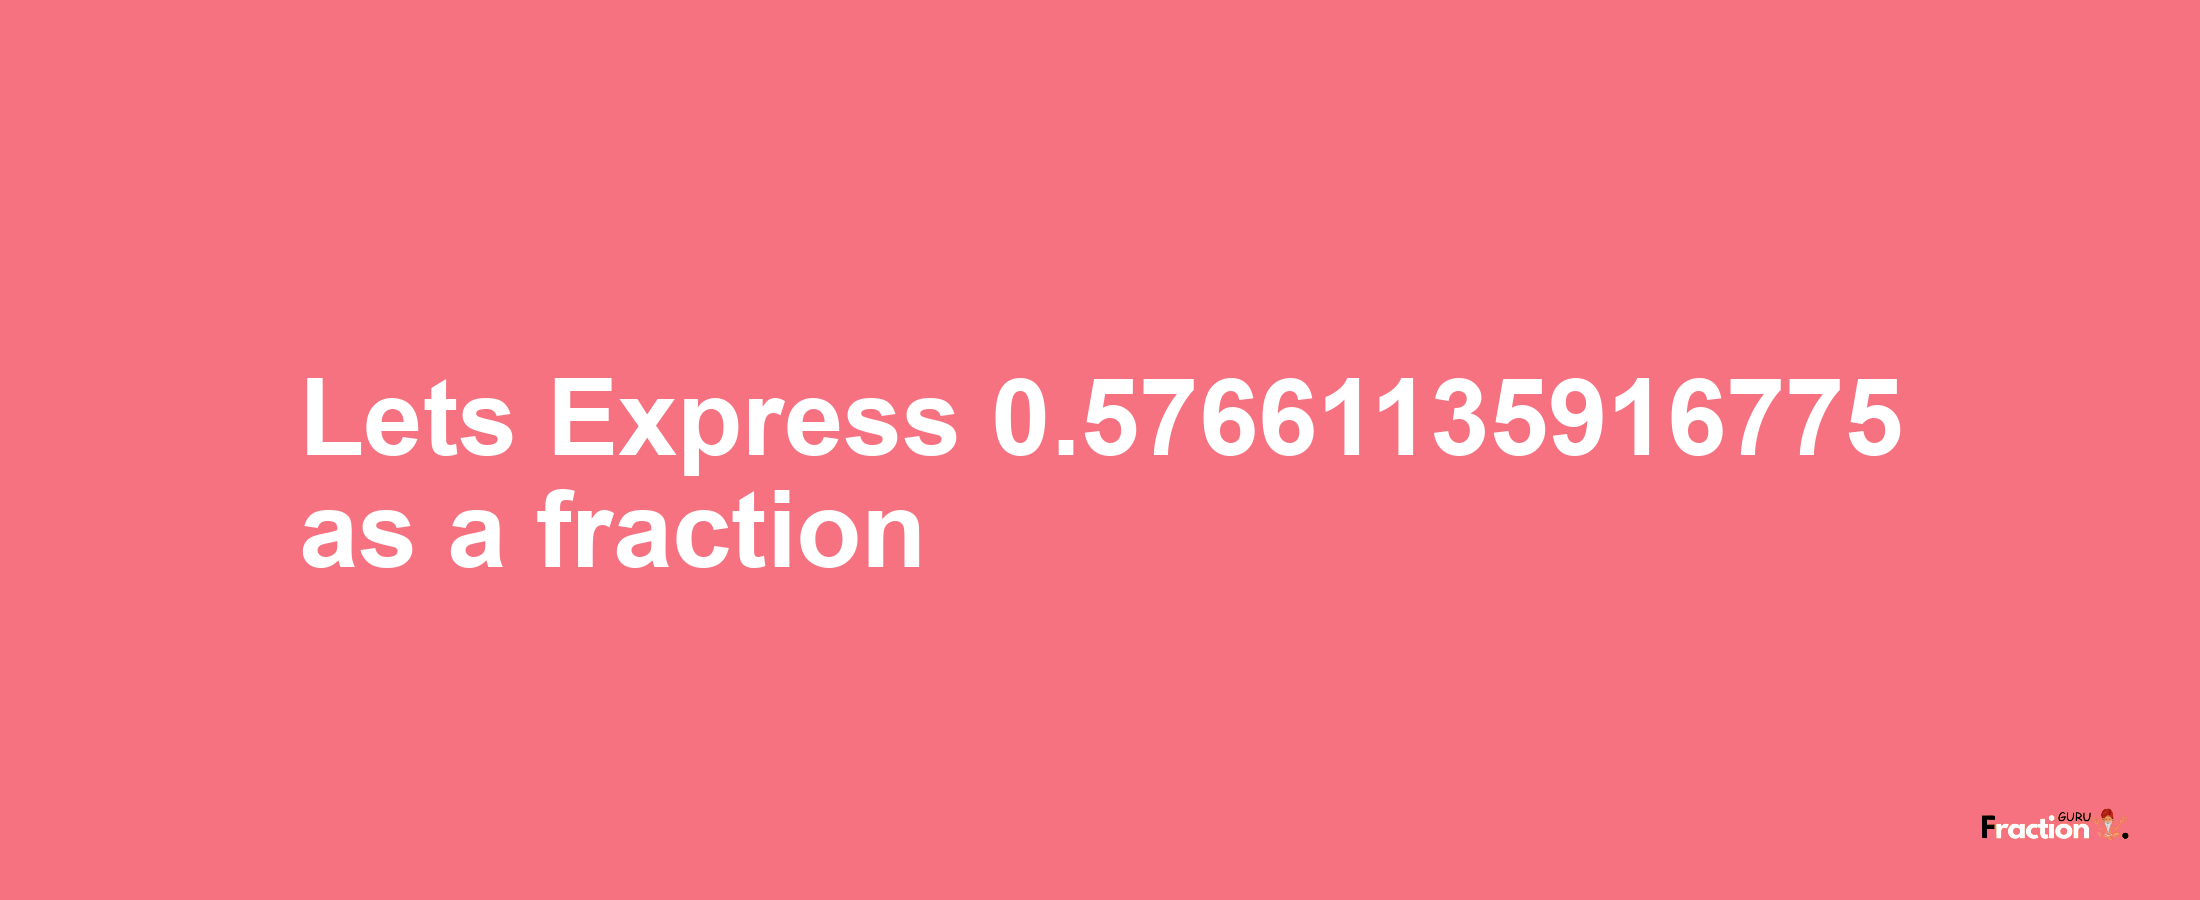 Lets Express 0.57661135916775 as afraction